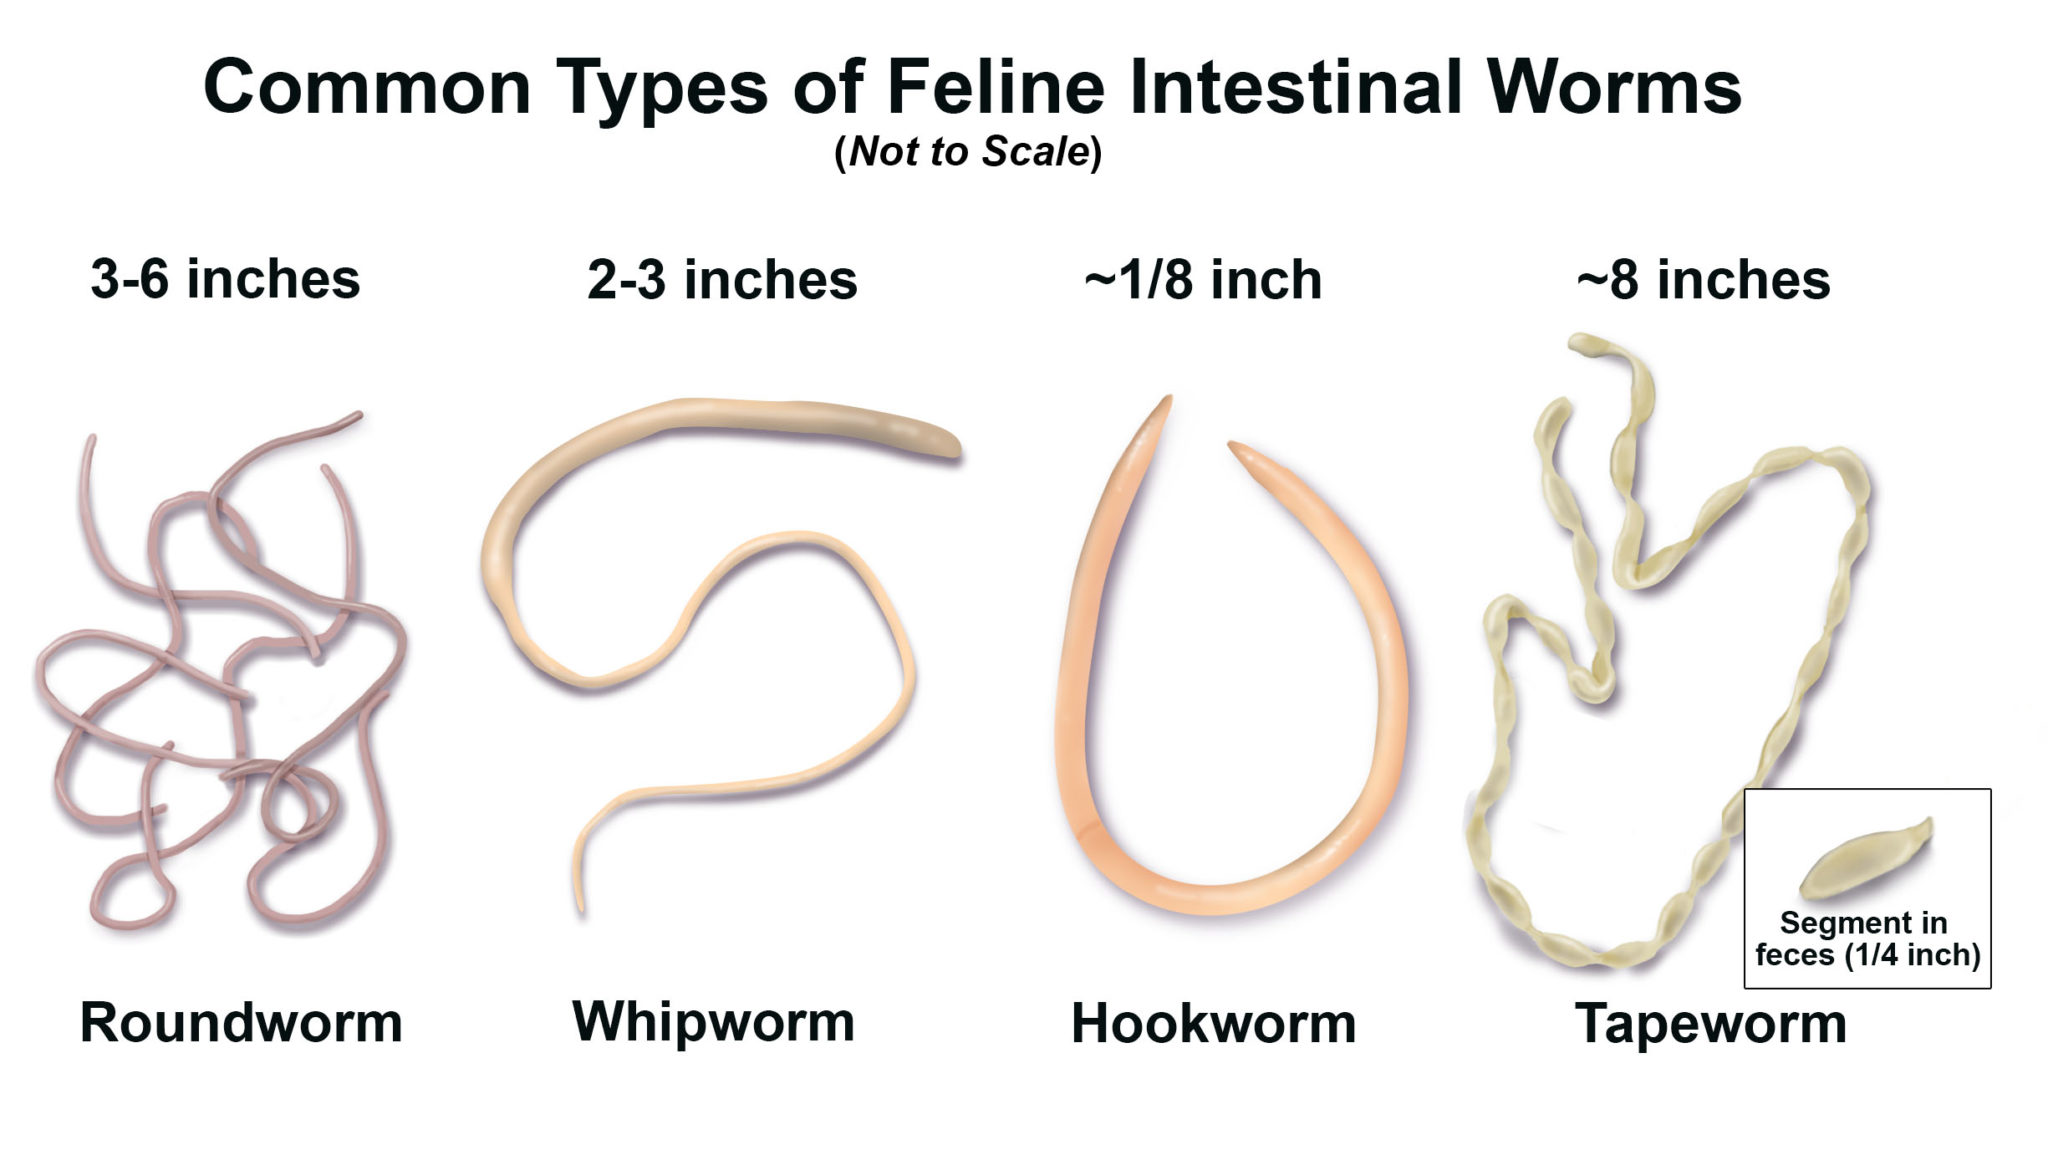 Common Types of Intestinal Worms scaled